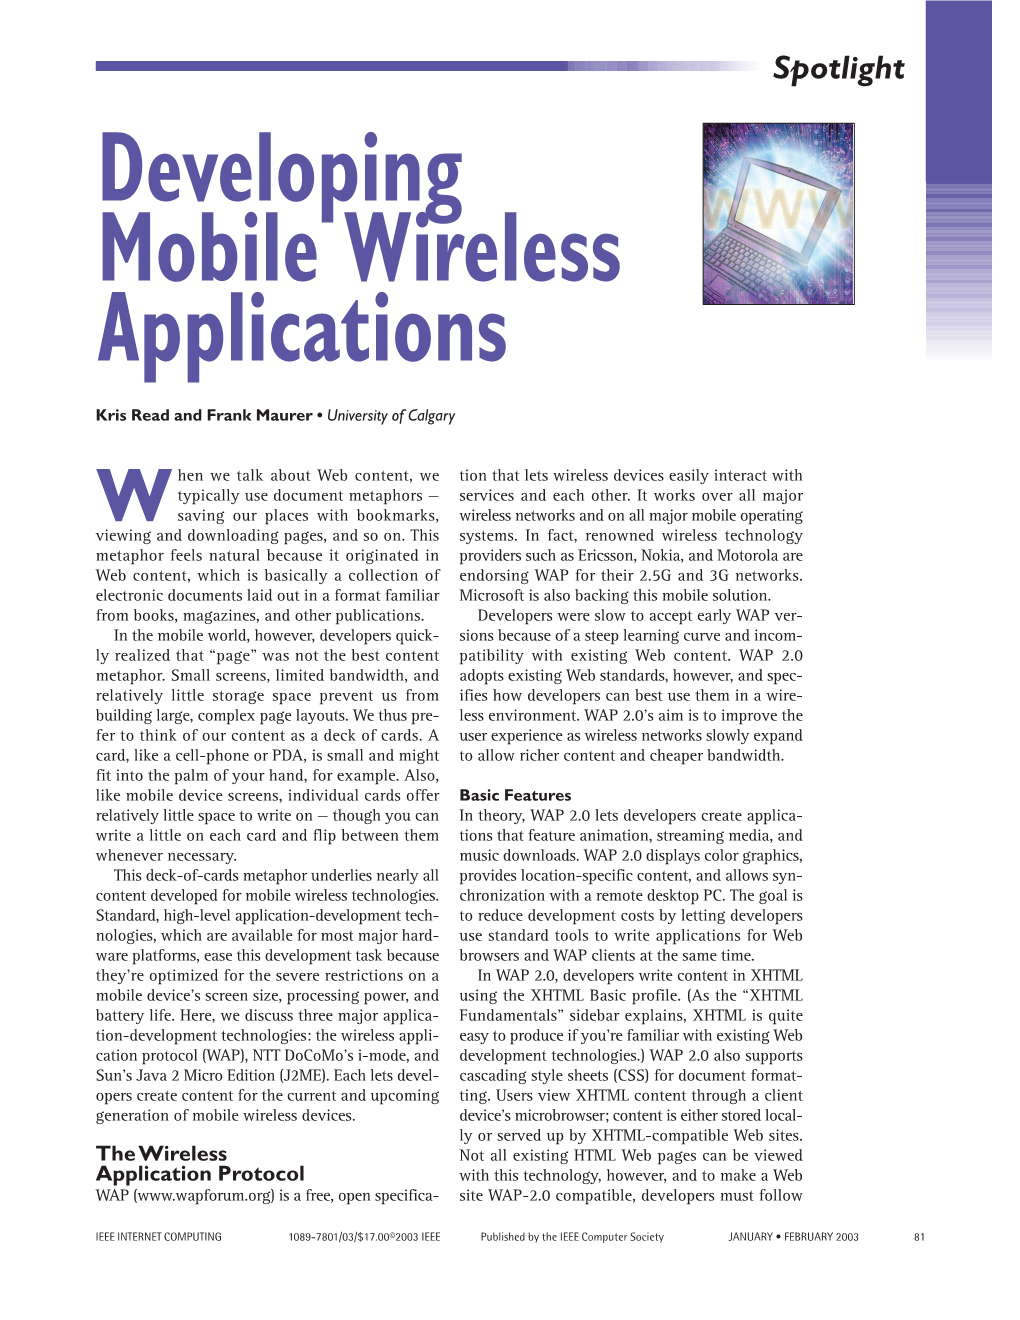 Developing Mobile Wireless Applications